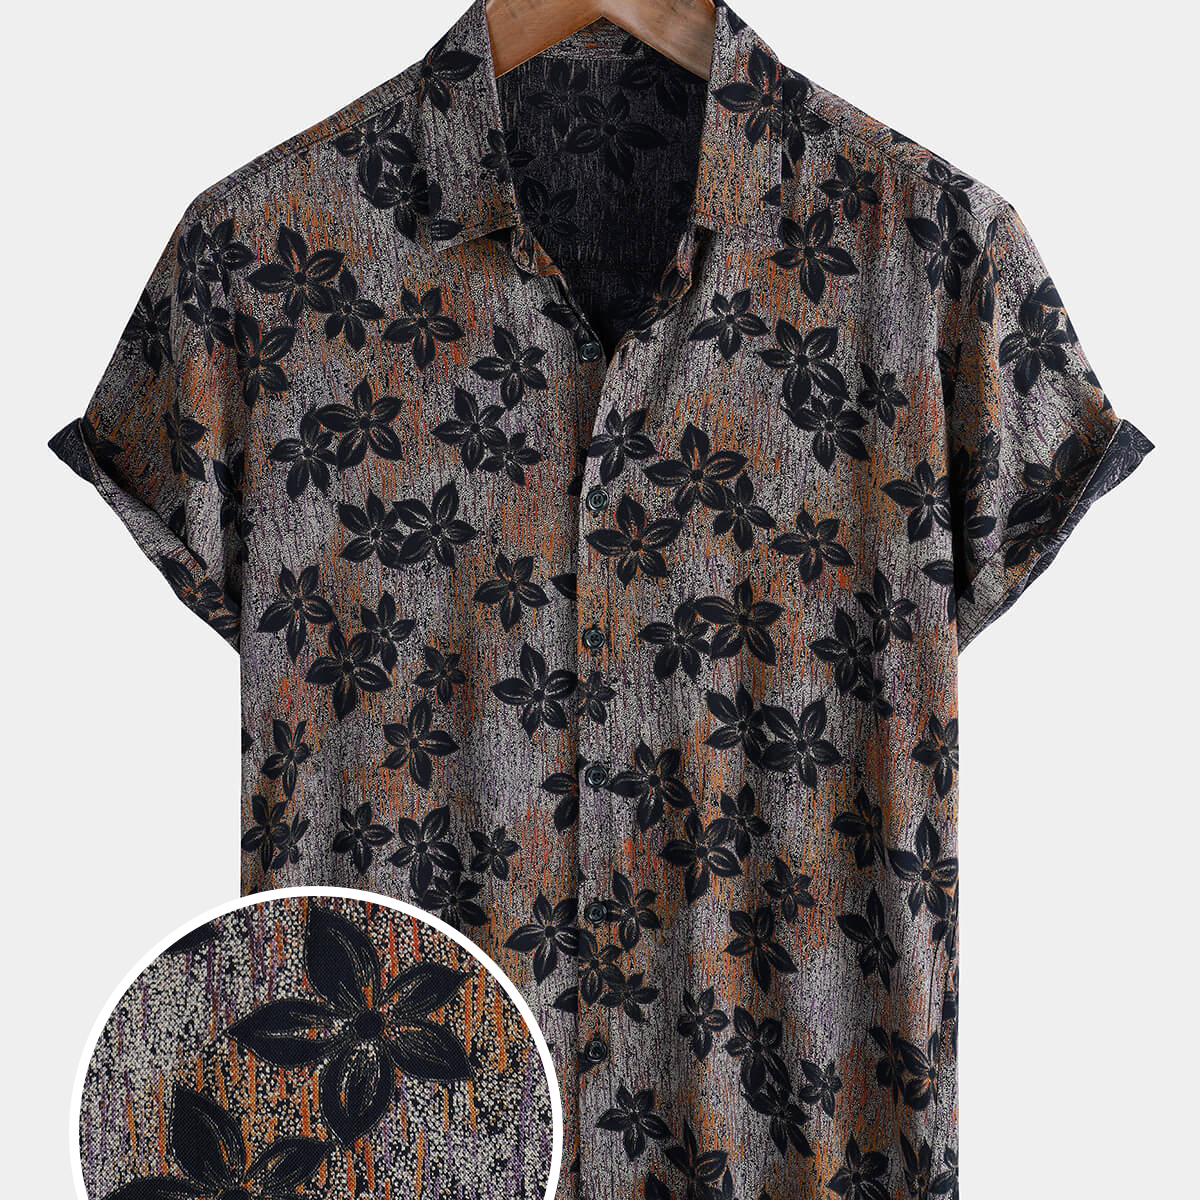 Men's Floral Navy Blue Holiday Casual Summer Short Sleeve Button Up Shirt